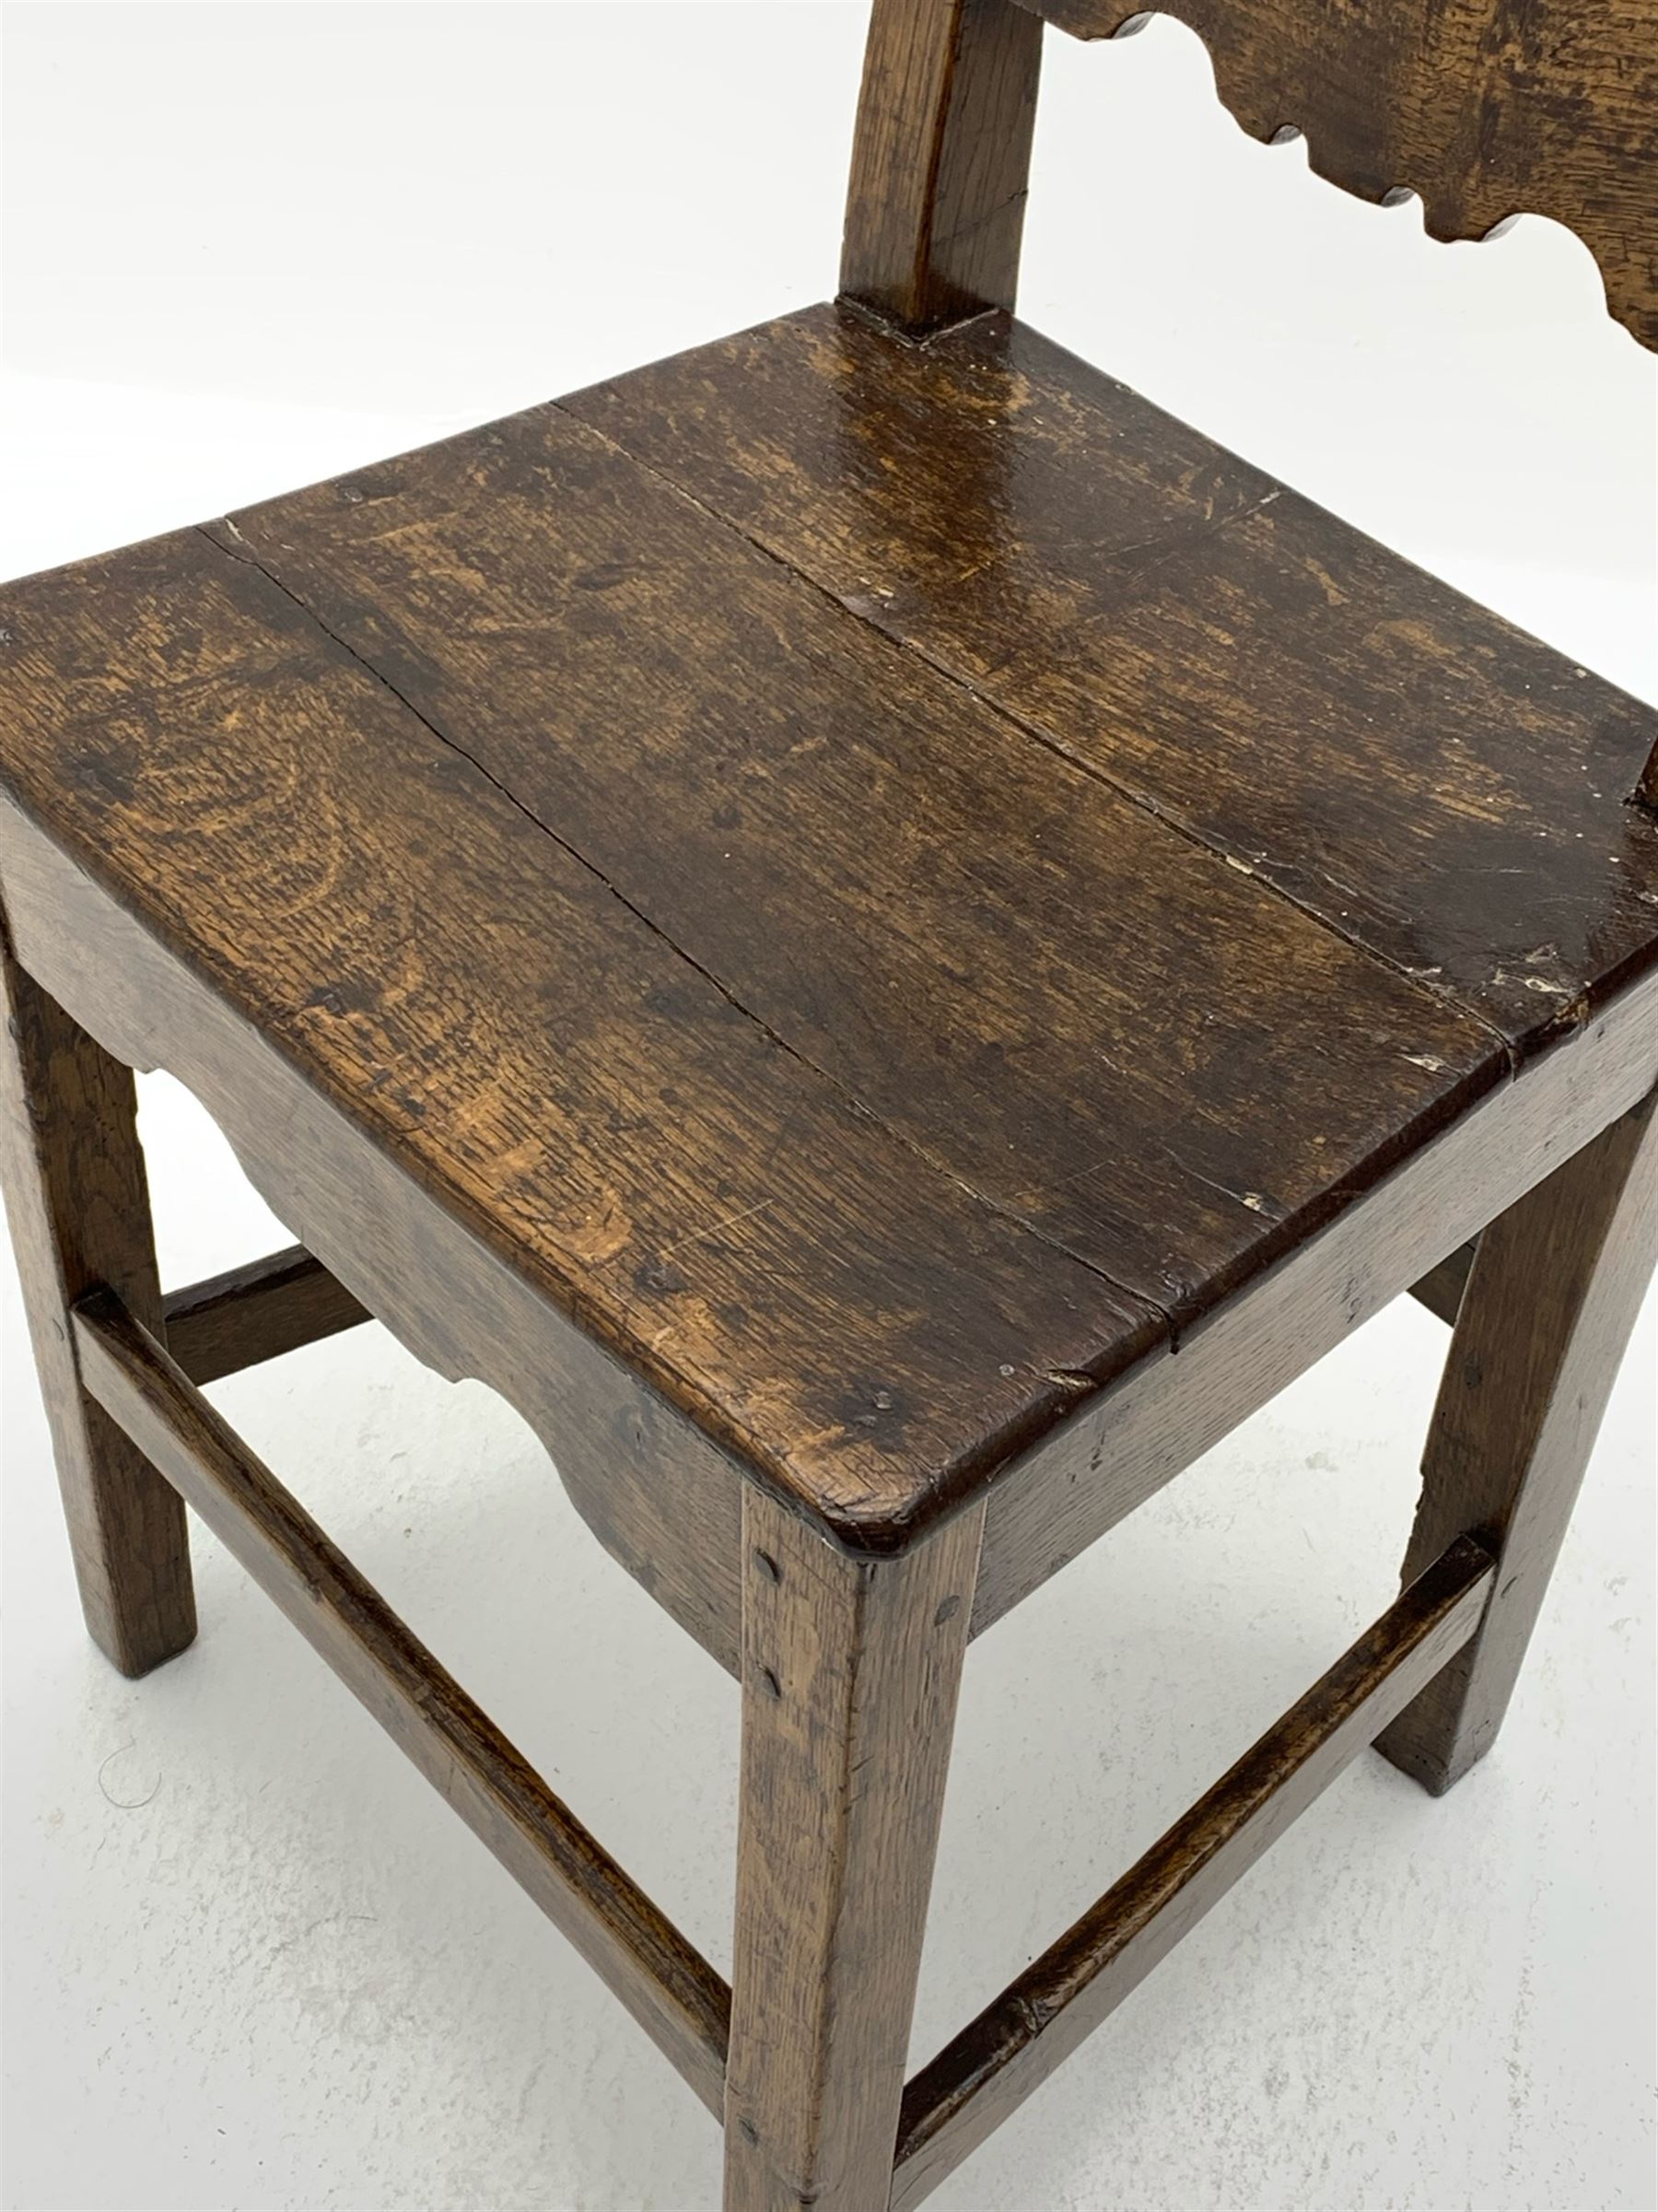 18th century oak chair - Image 3 of 3